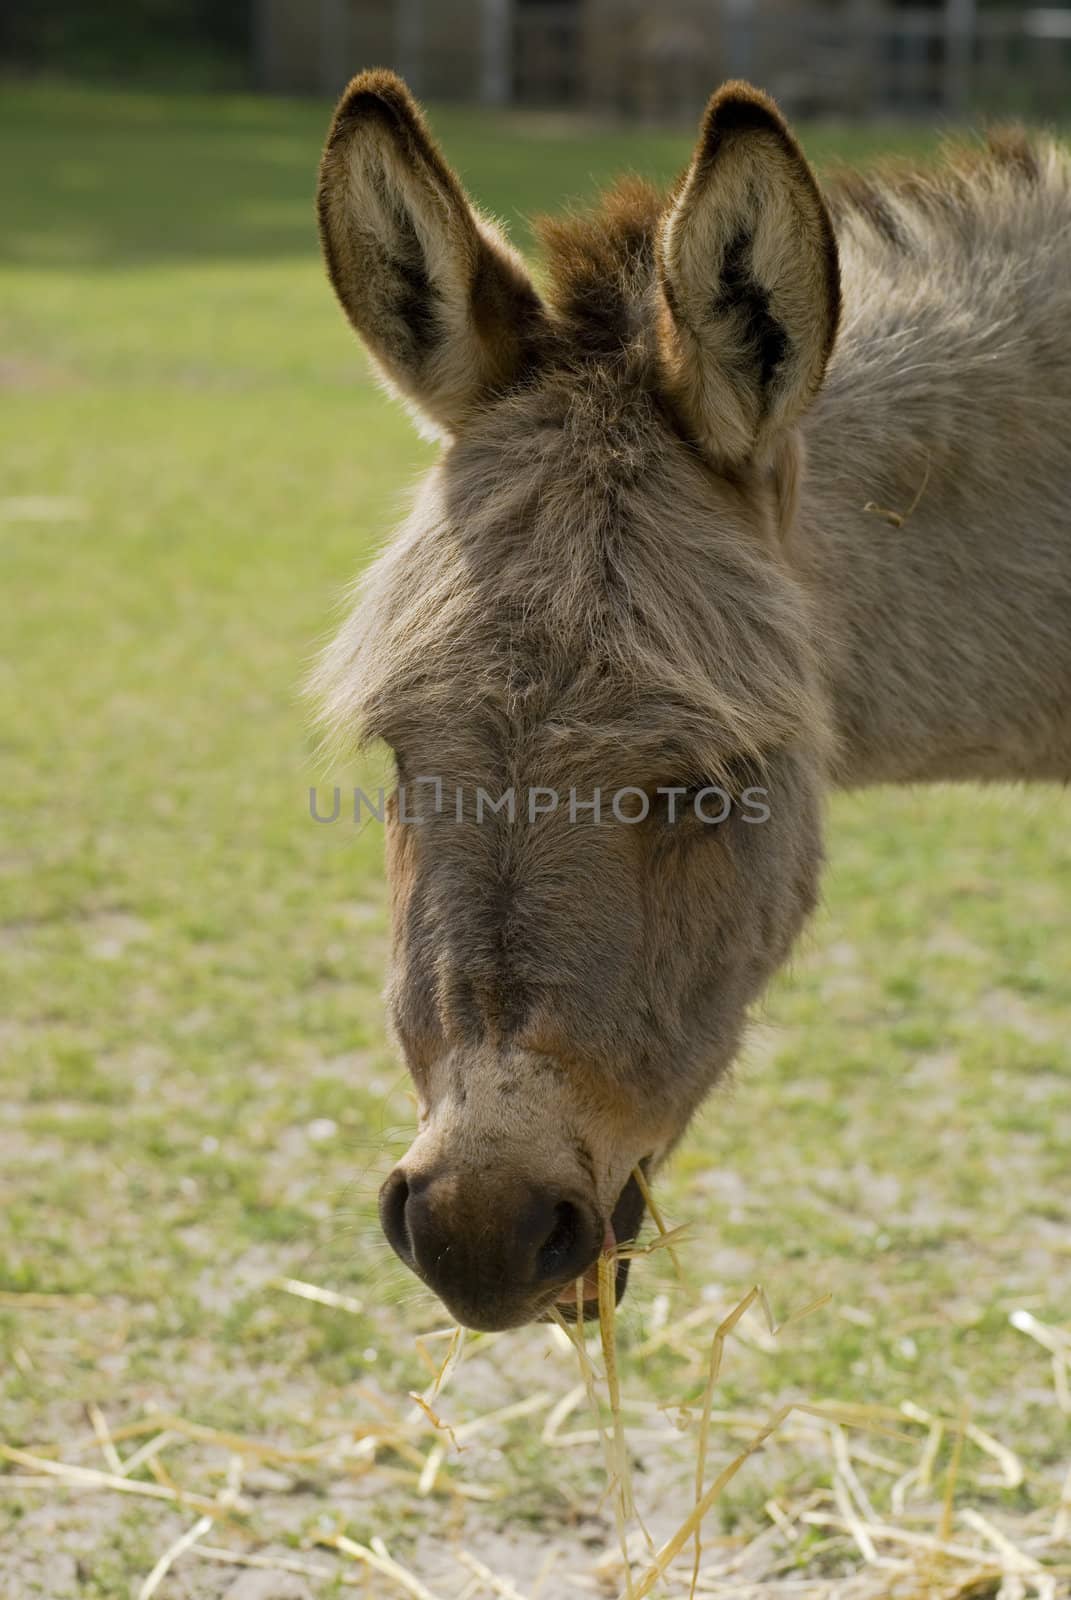 Portrait of an eating donkey in a meadow.